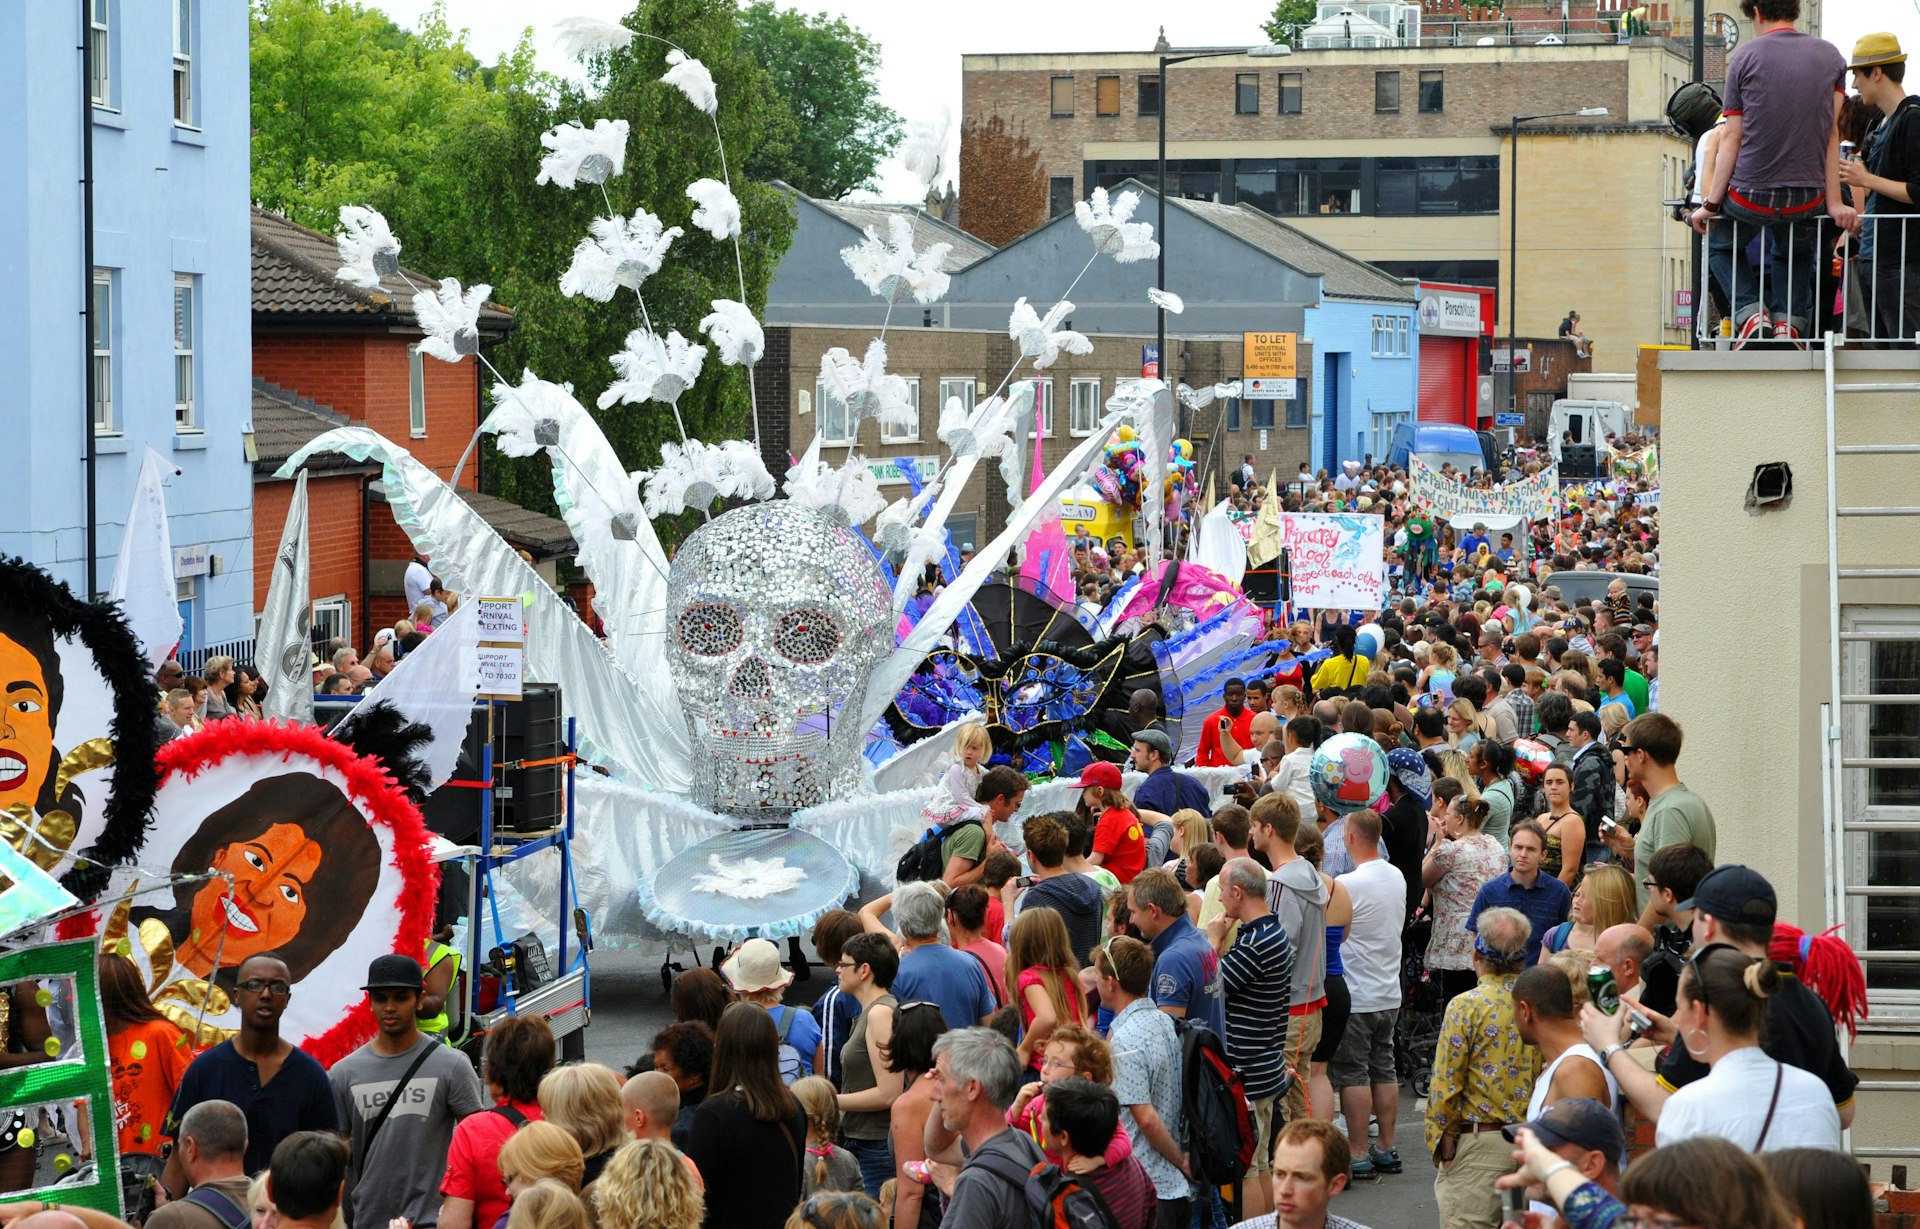 A giant float shaped like a huge skull with feathers goes down a street. People line the street watching the carnival procession